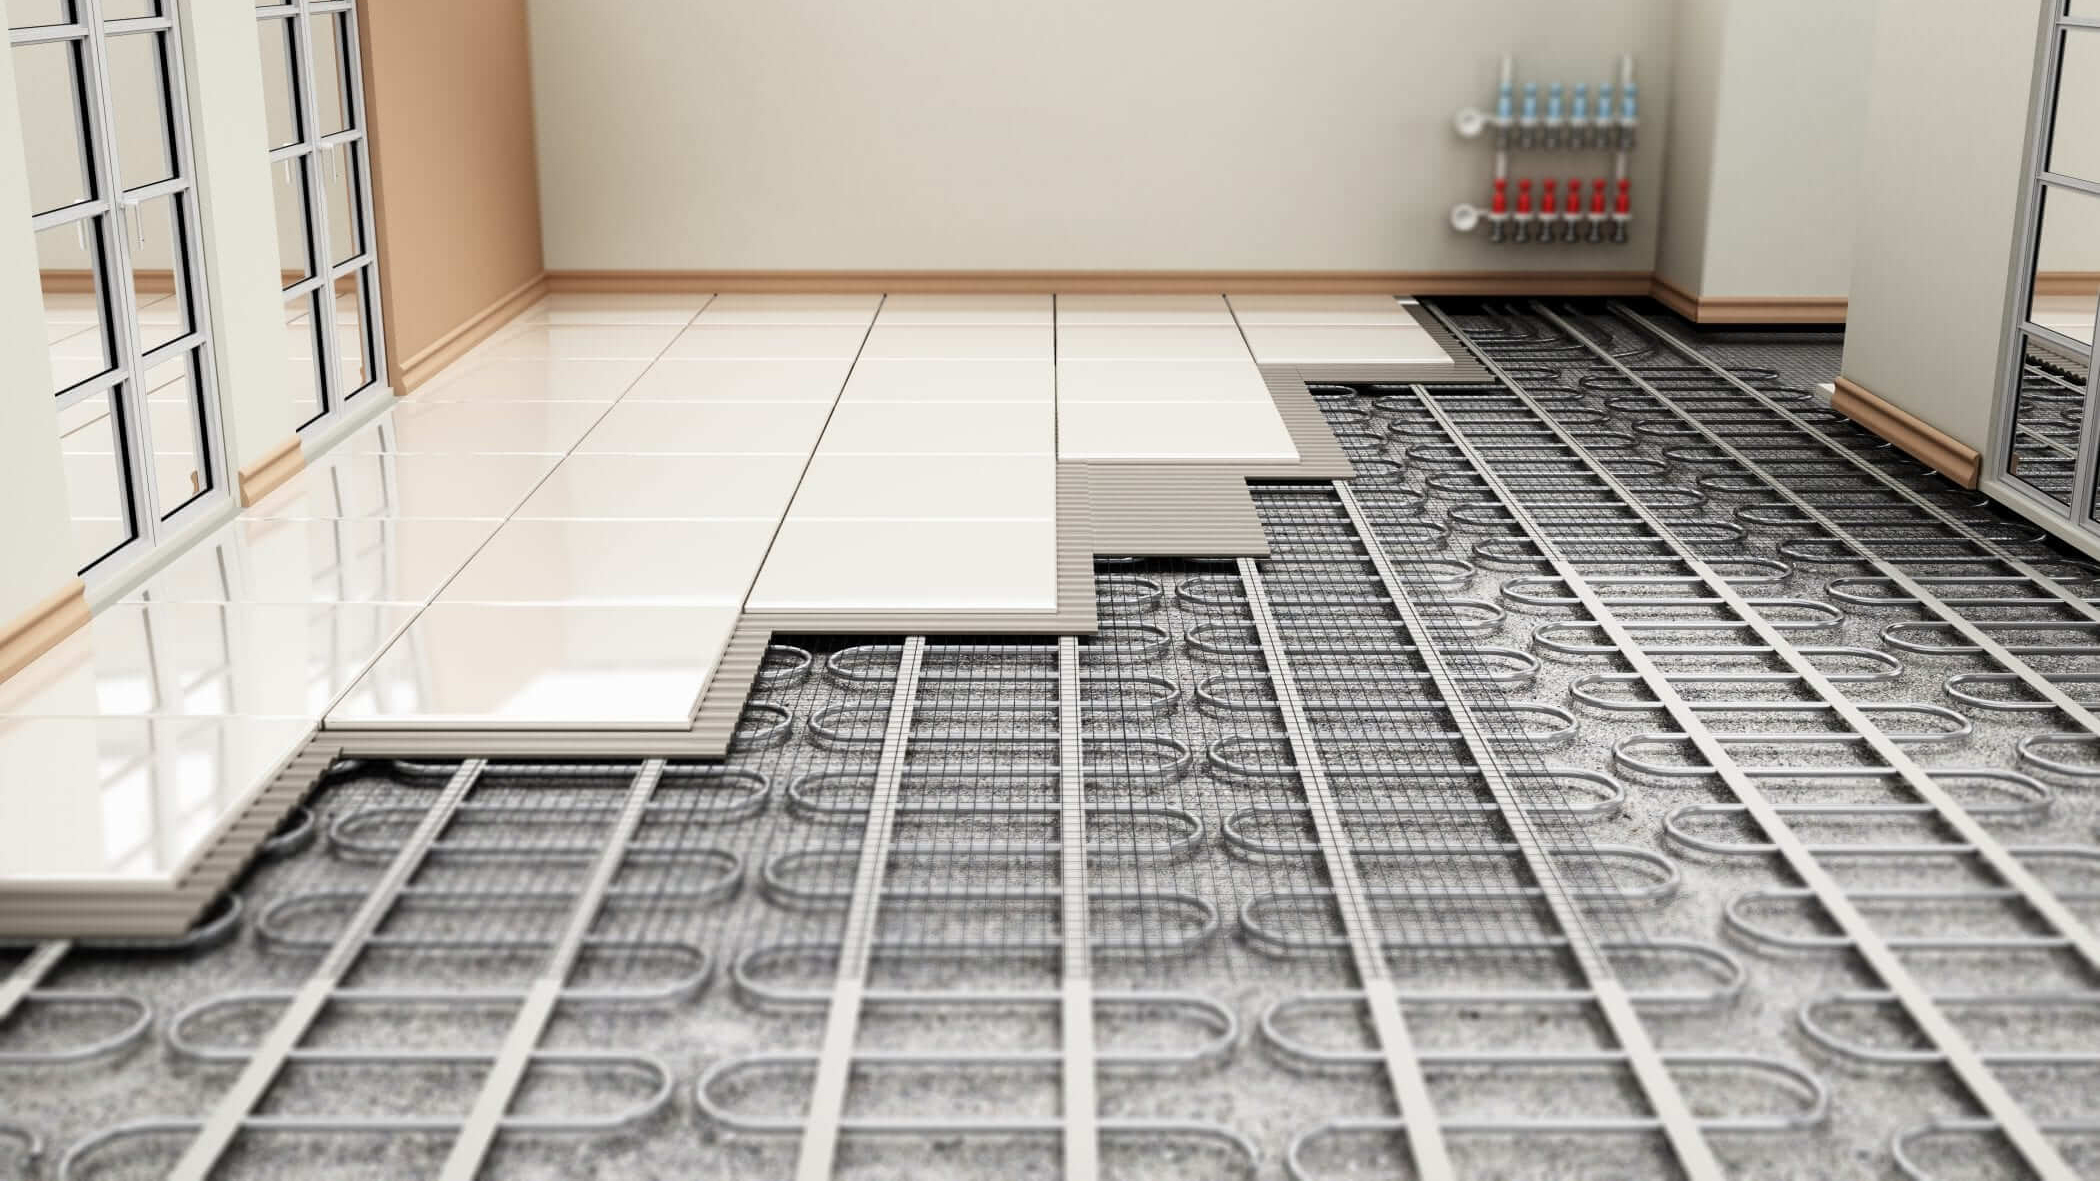 Advantages of underfloor heating over conventional systems